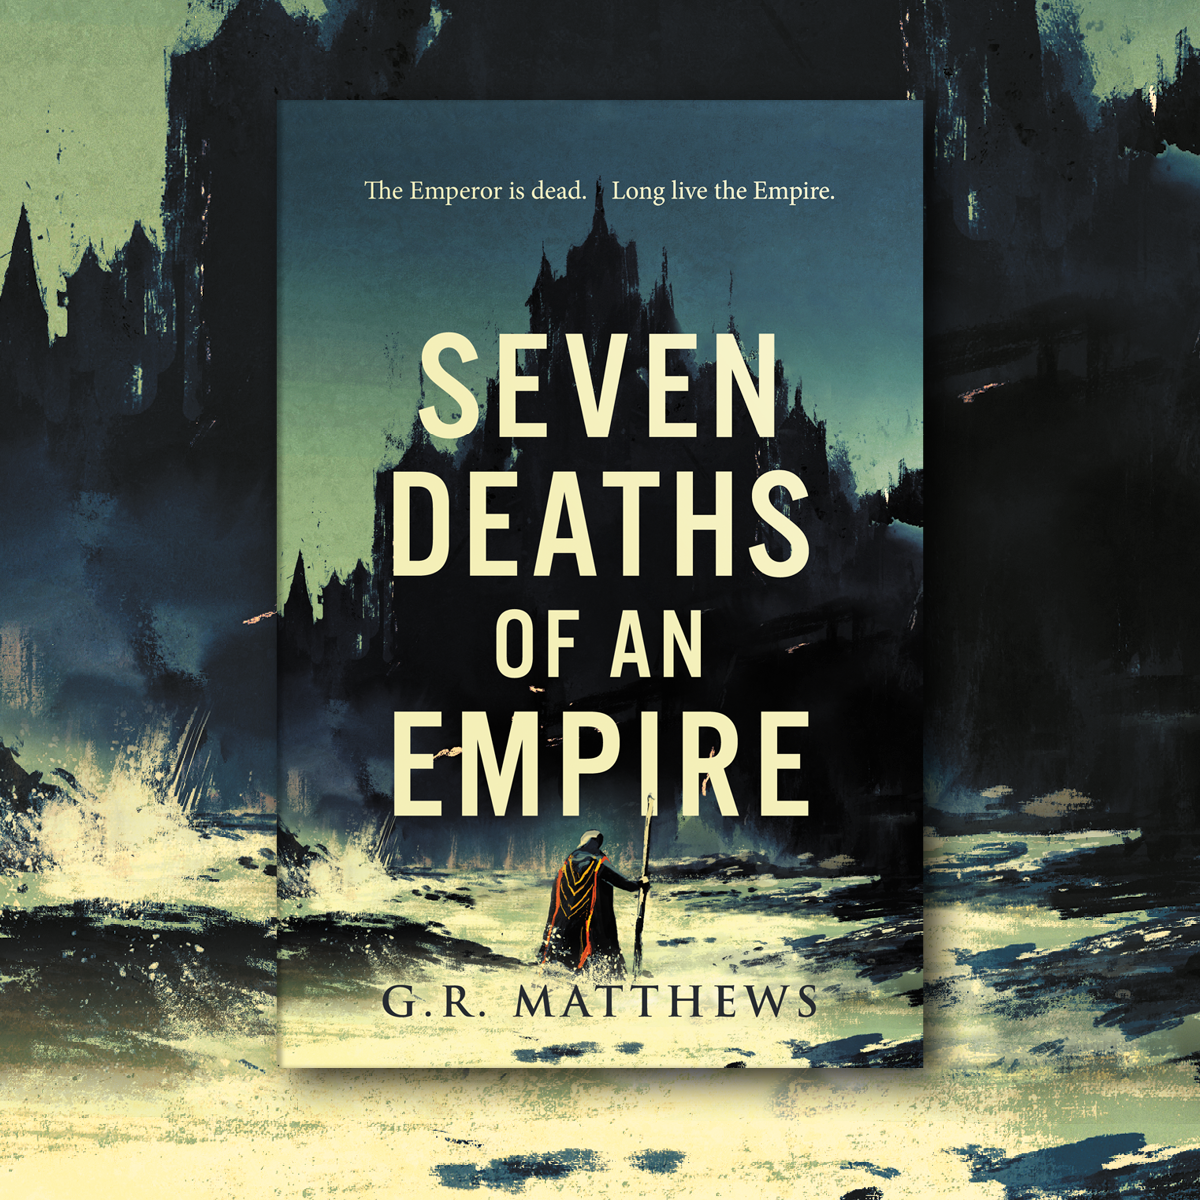 OUT NOW: Seven Deaths of an Empire by G. R. Matthews in Paperback!